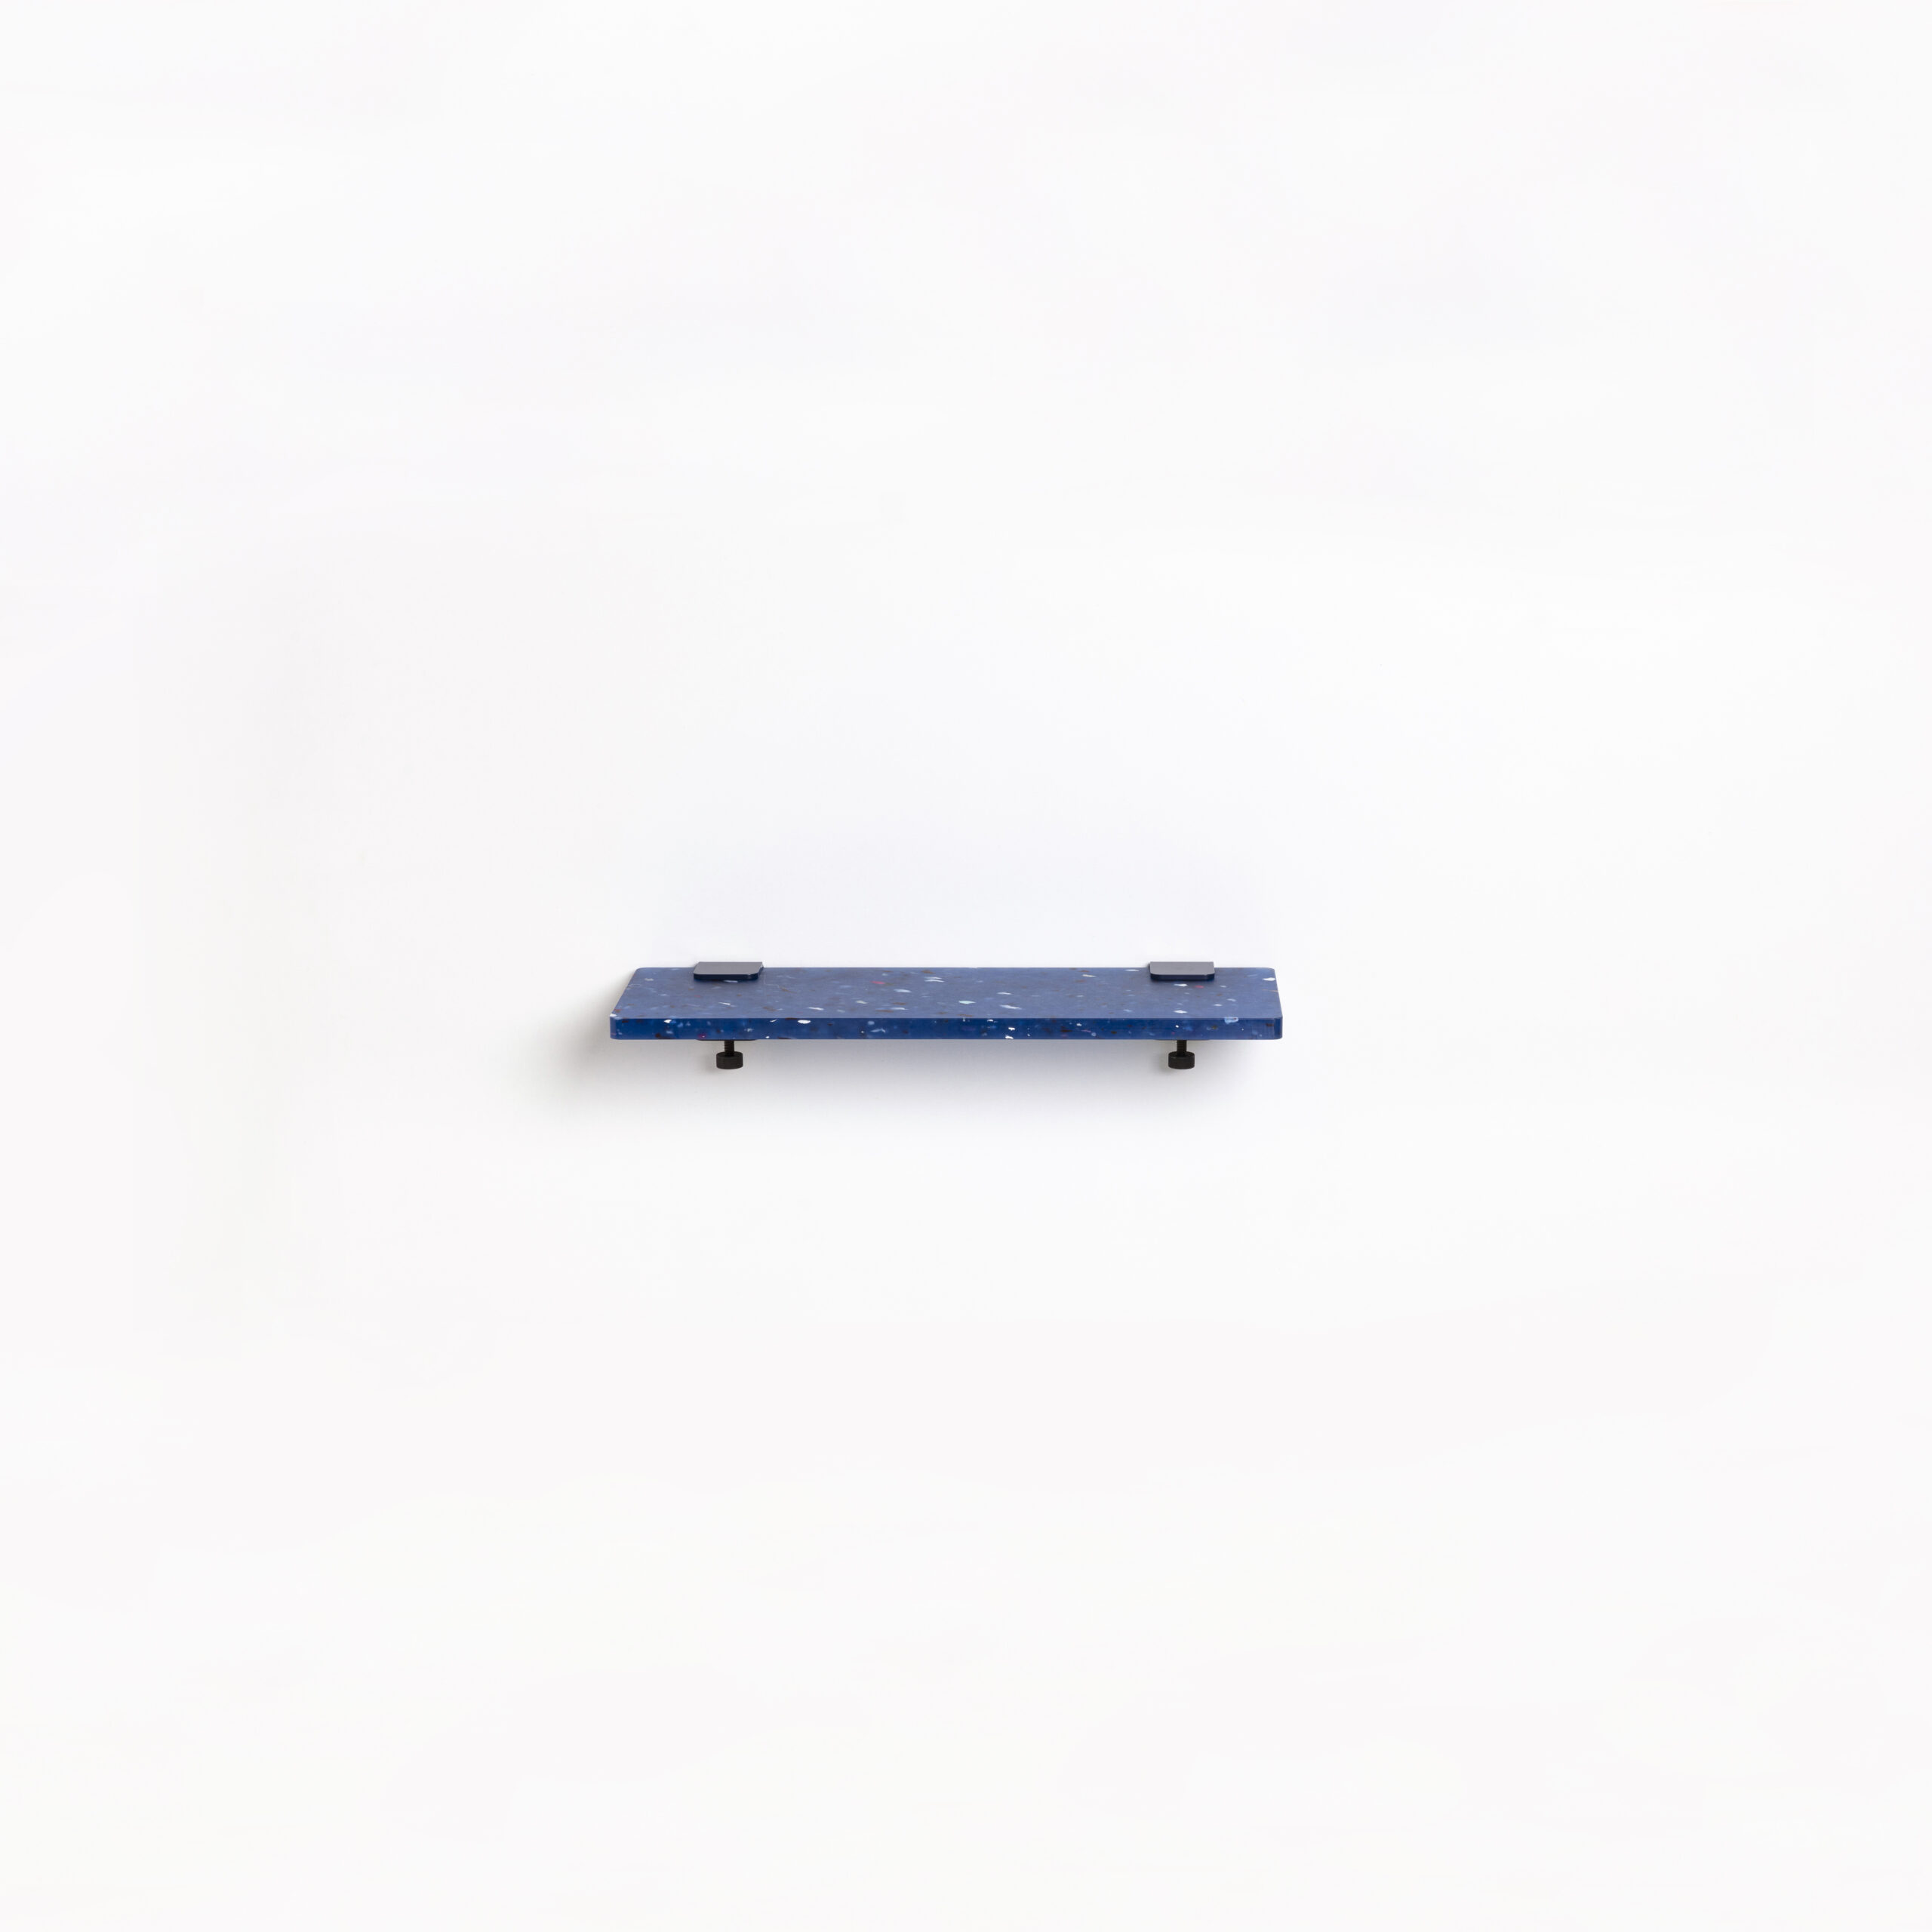 Pacifico blue recycled plastic wall shelf - 60 and 90cm